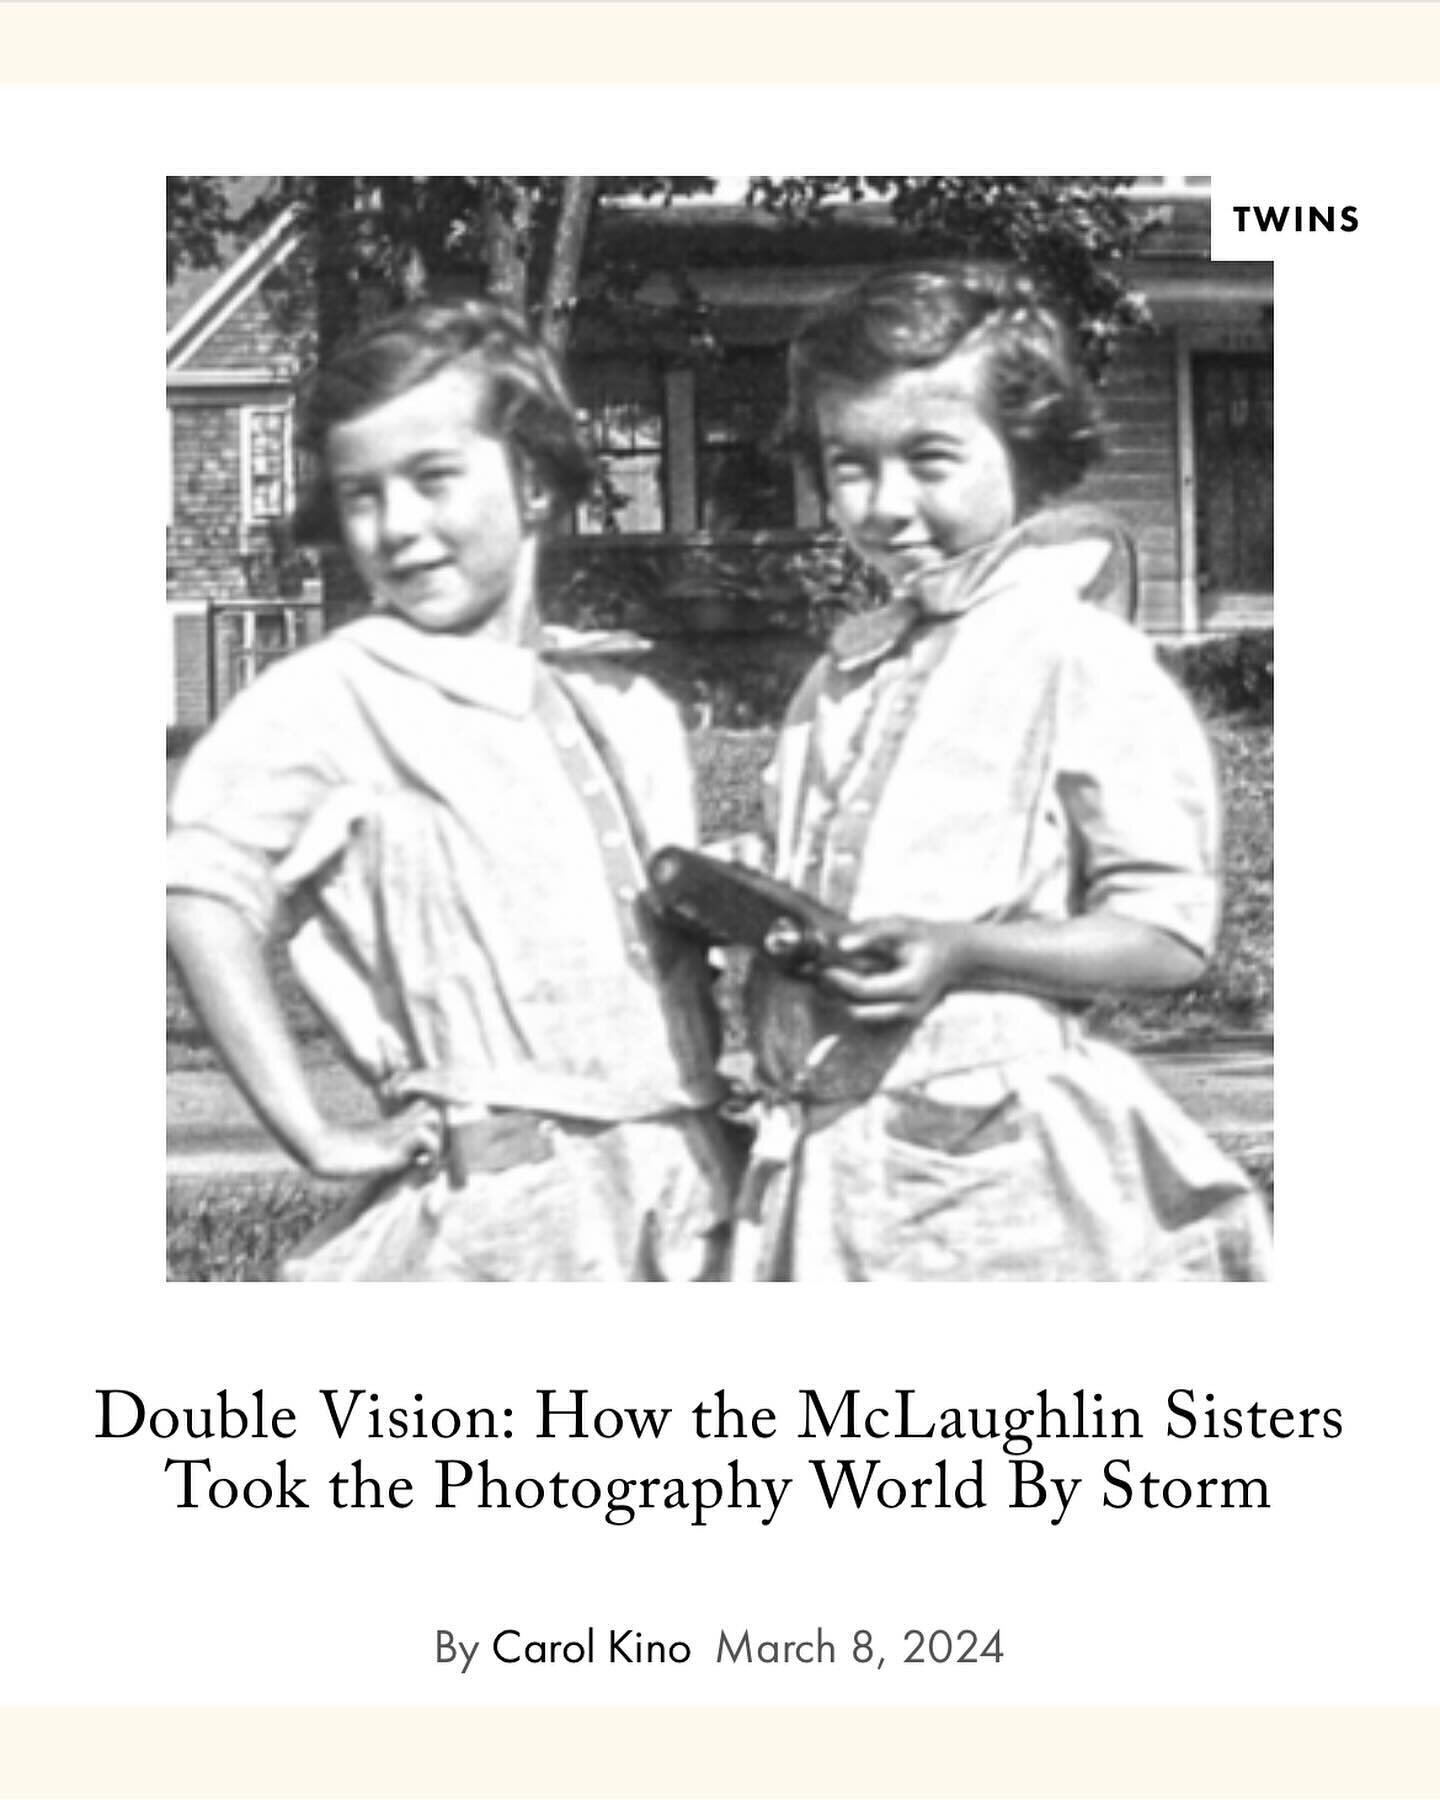 Thanks, LitHub! This is the prologue - it finds the McLaughlin twins in 1981, when their book Twins on Twins was published, and they lectured at ICP with Cornell Capa and appeared for a two-part interview on Dick Cavett. Mayor Lindsay was one of the 